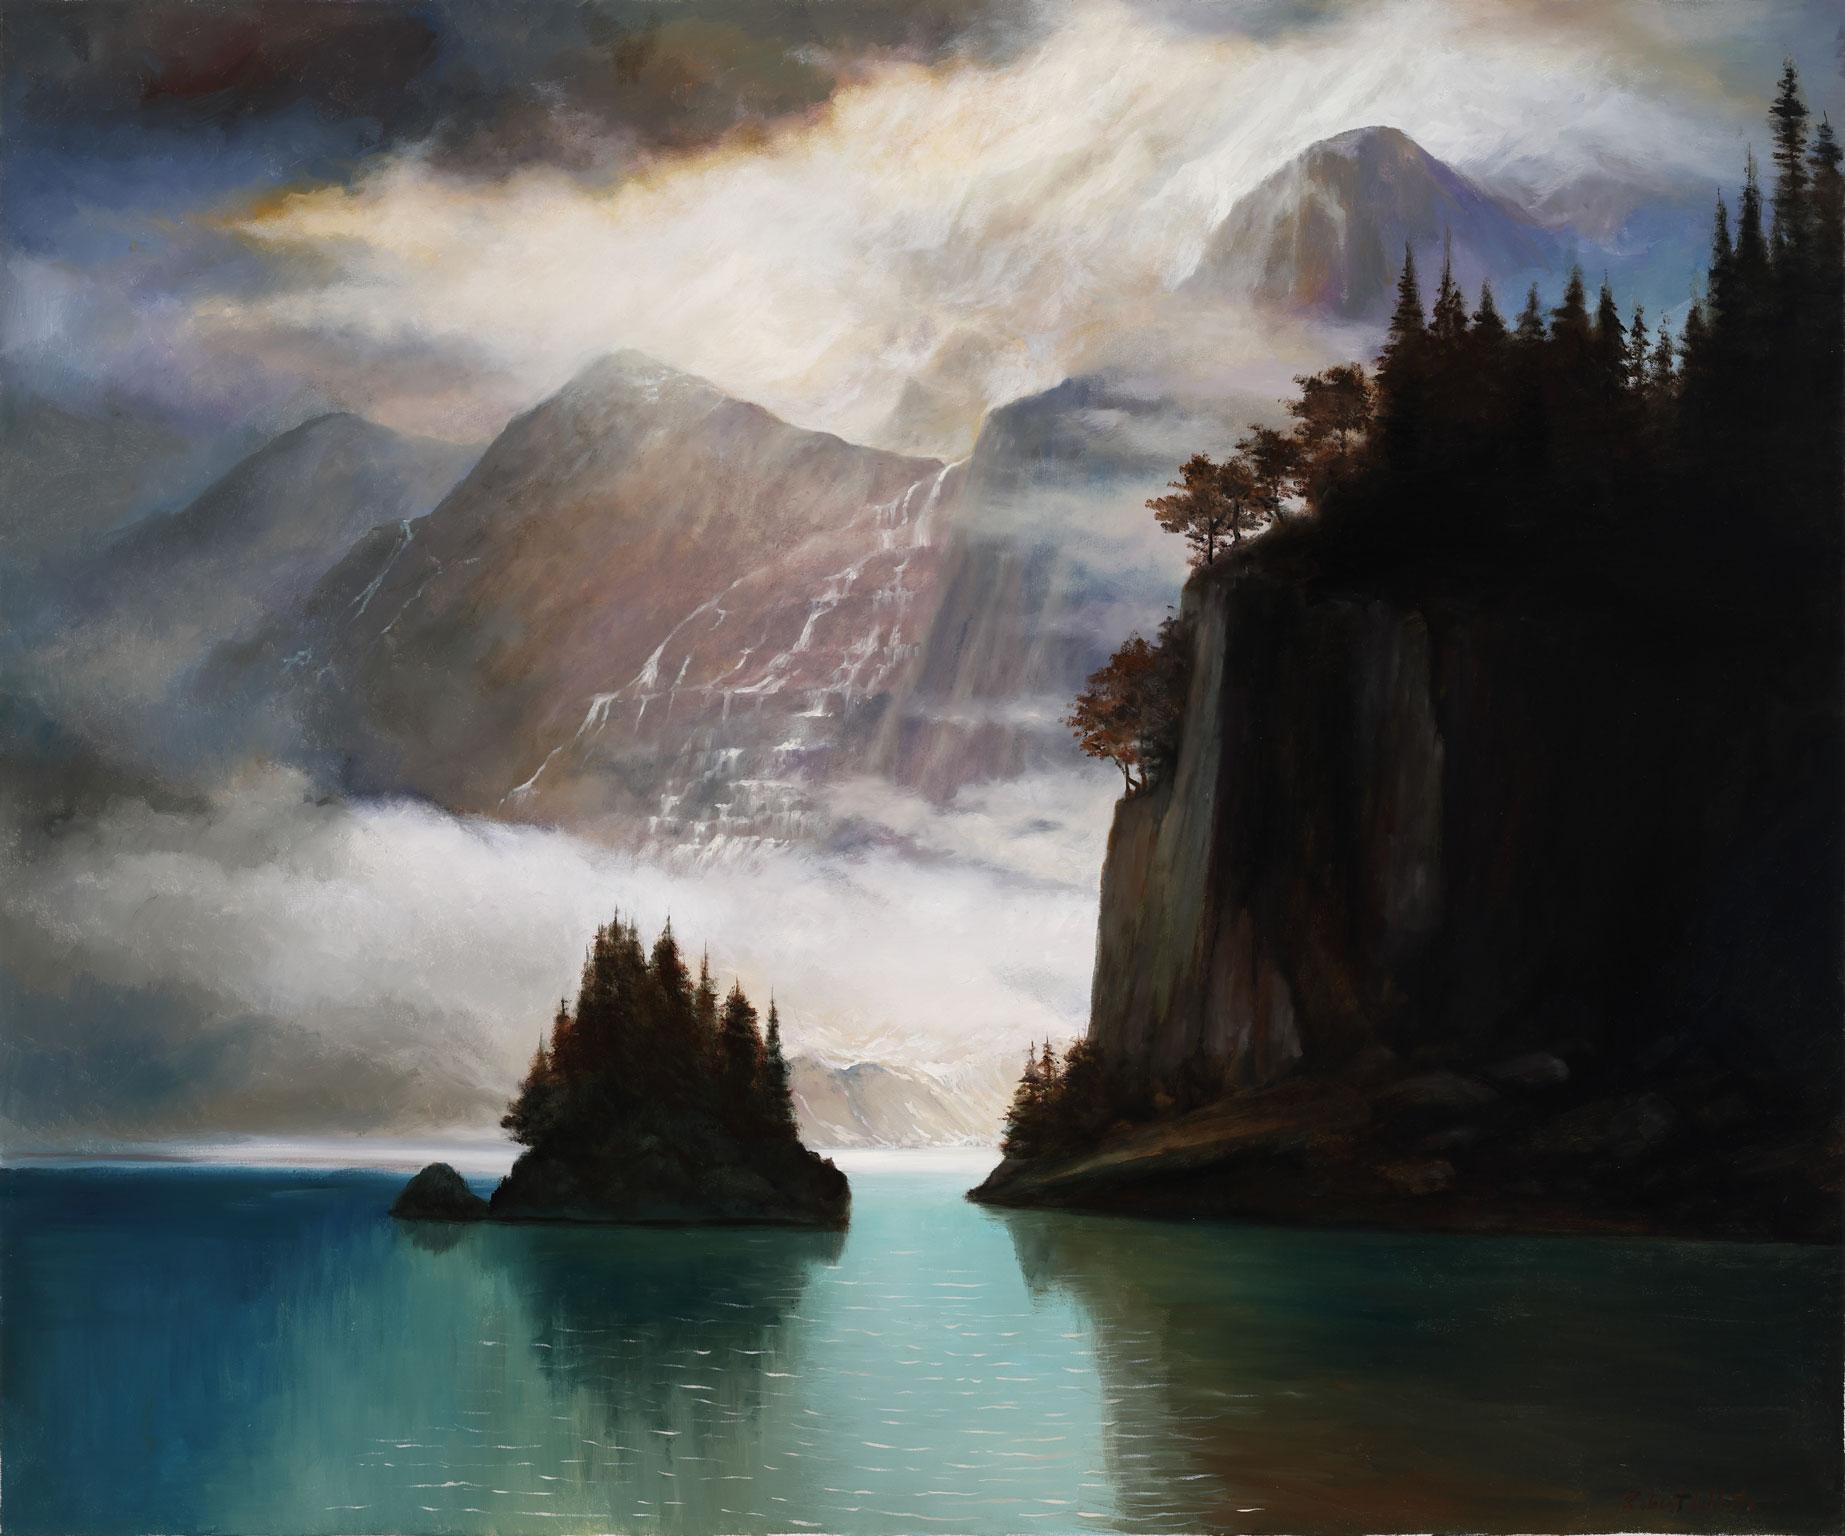 Robert Kenneth White Landscape Painting - "Ice Mountain" Large Original Oil Painting by Robert White, Frameless Display